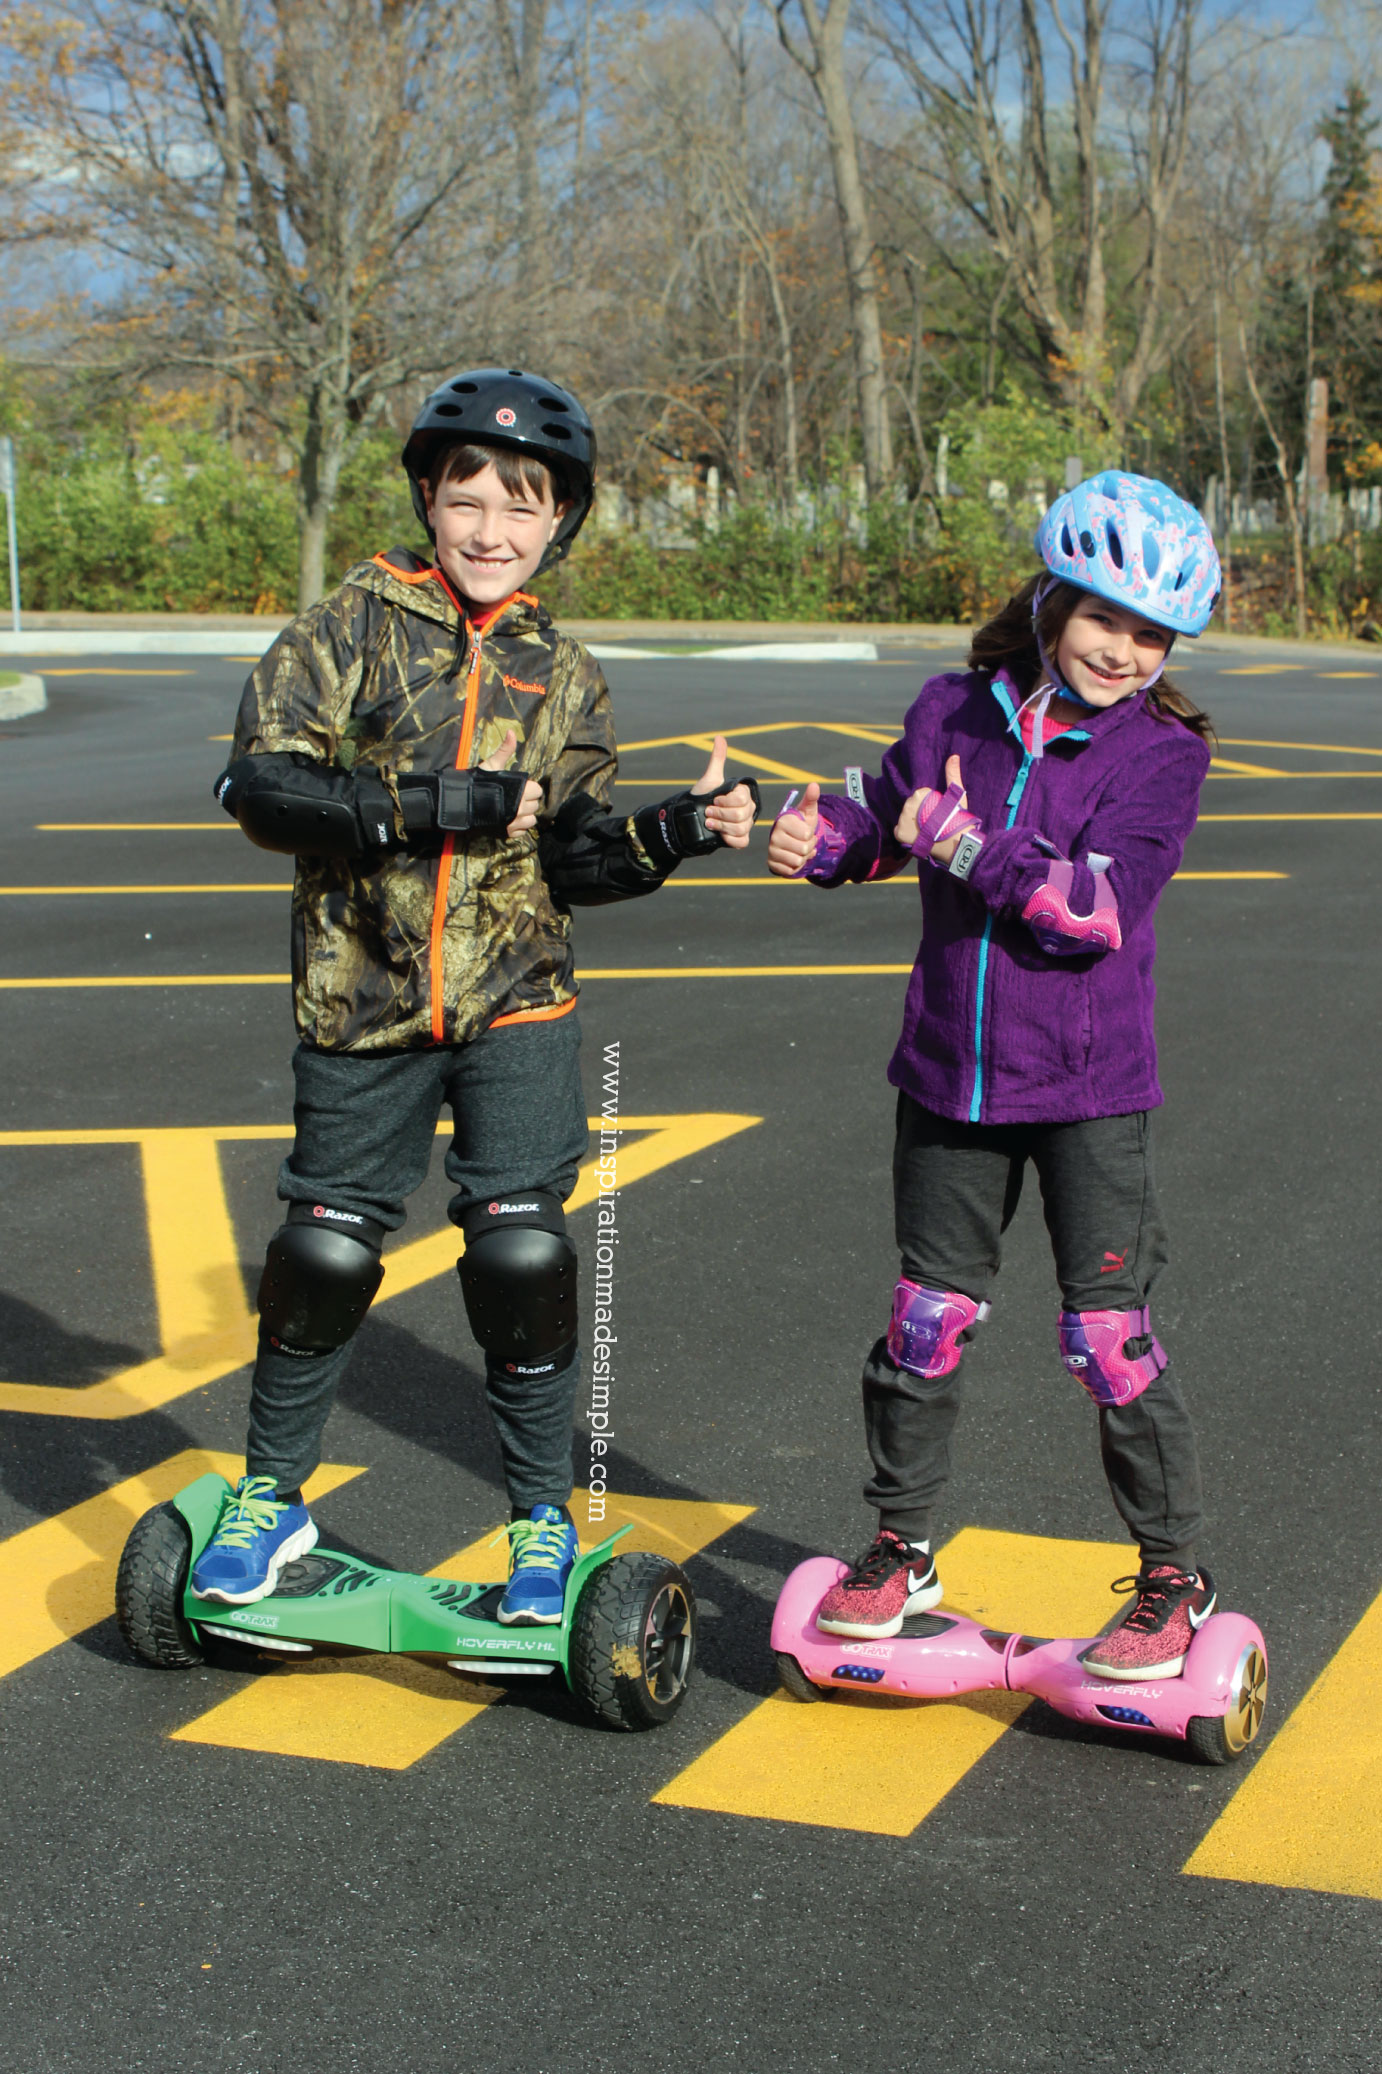 Random Acts of Kindness – Hoverboard Style